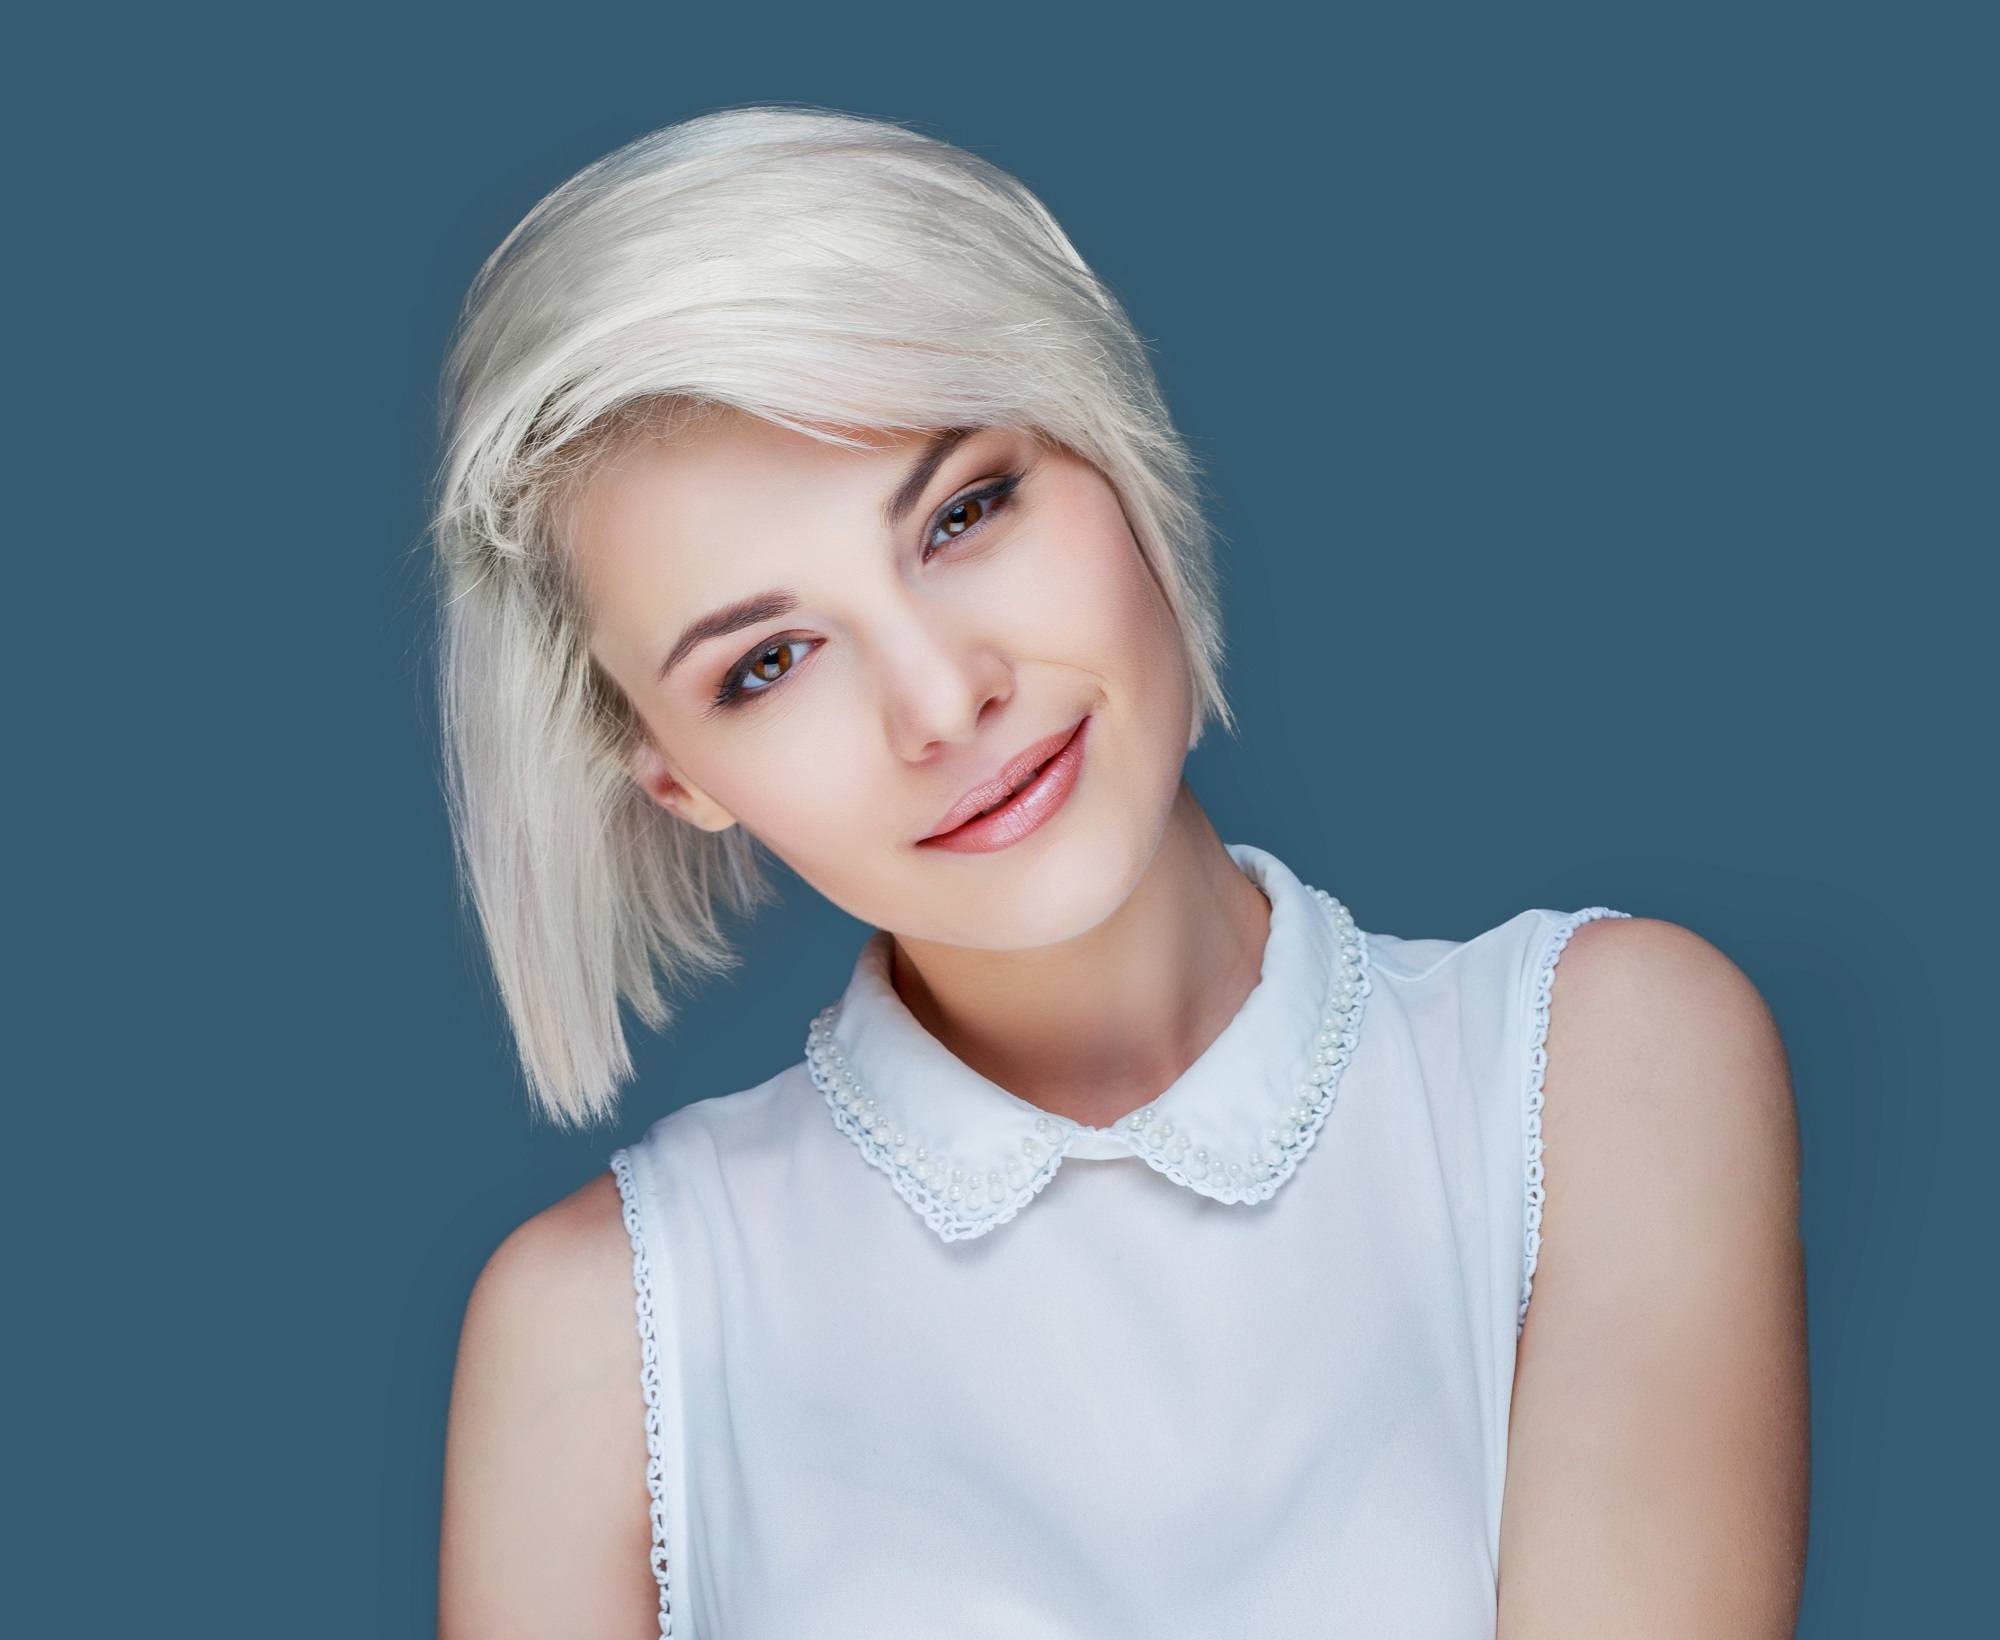 Short blonde hair: Closeup shot of a woman with short blonde hair wearing a white sleeveless top against a blue background